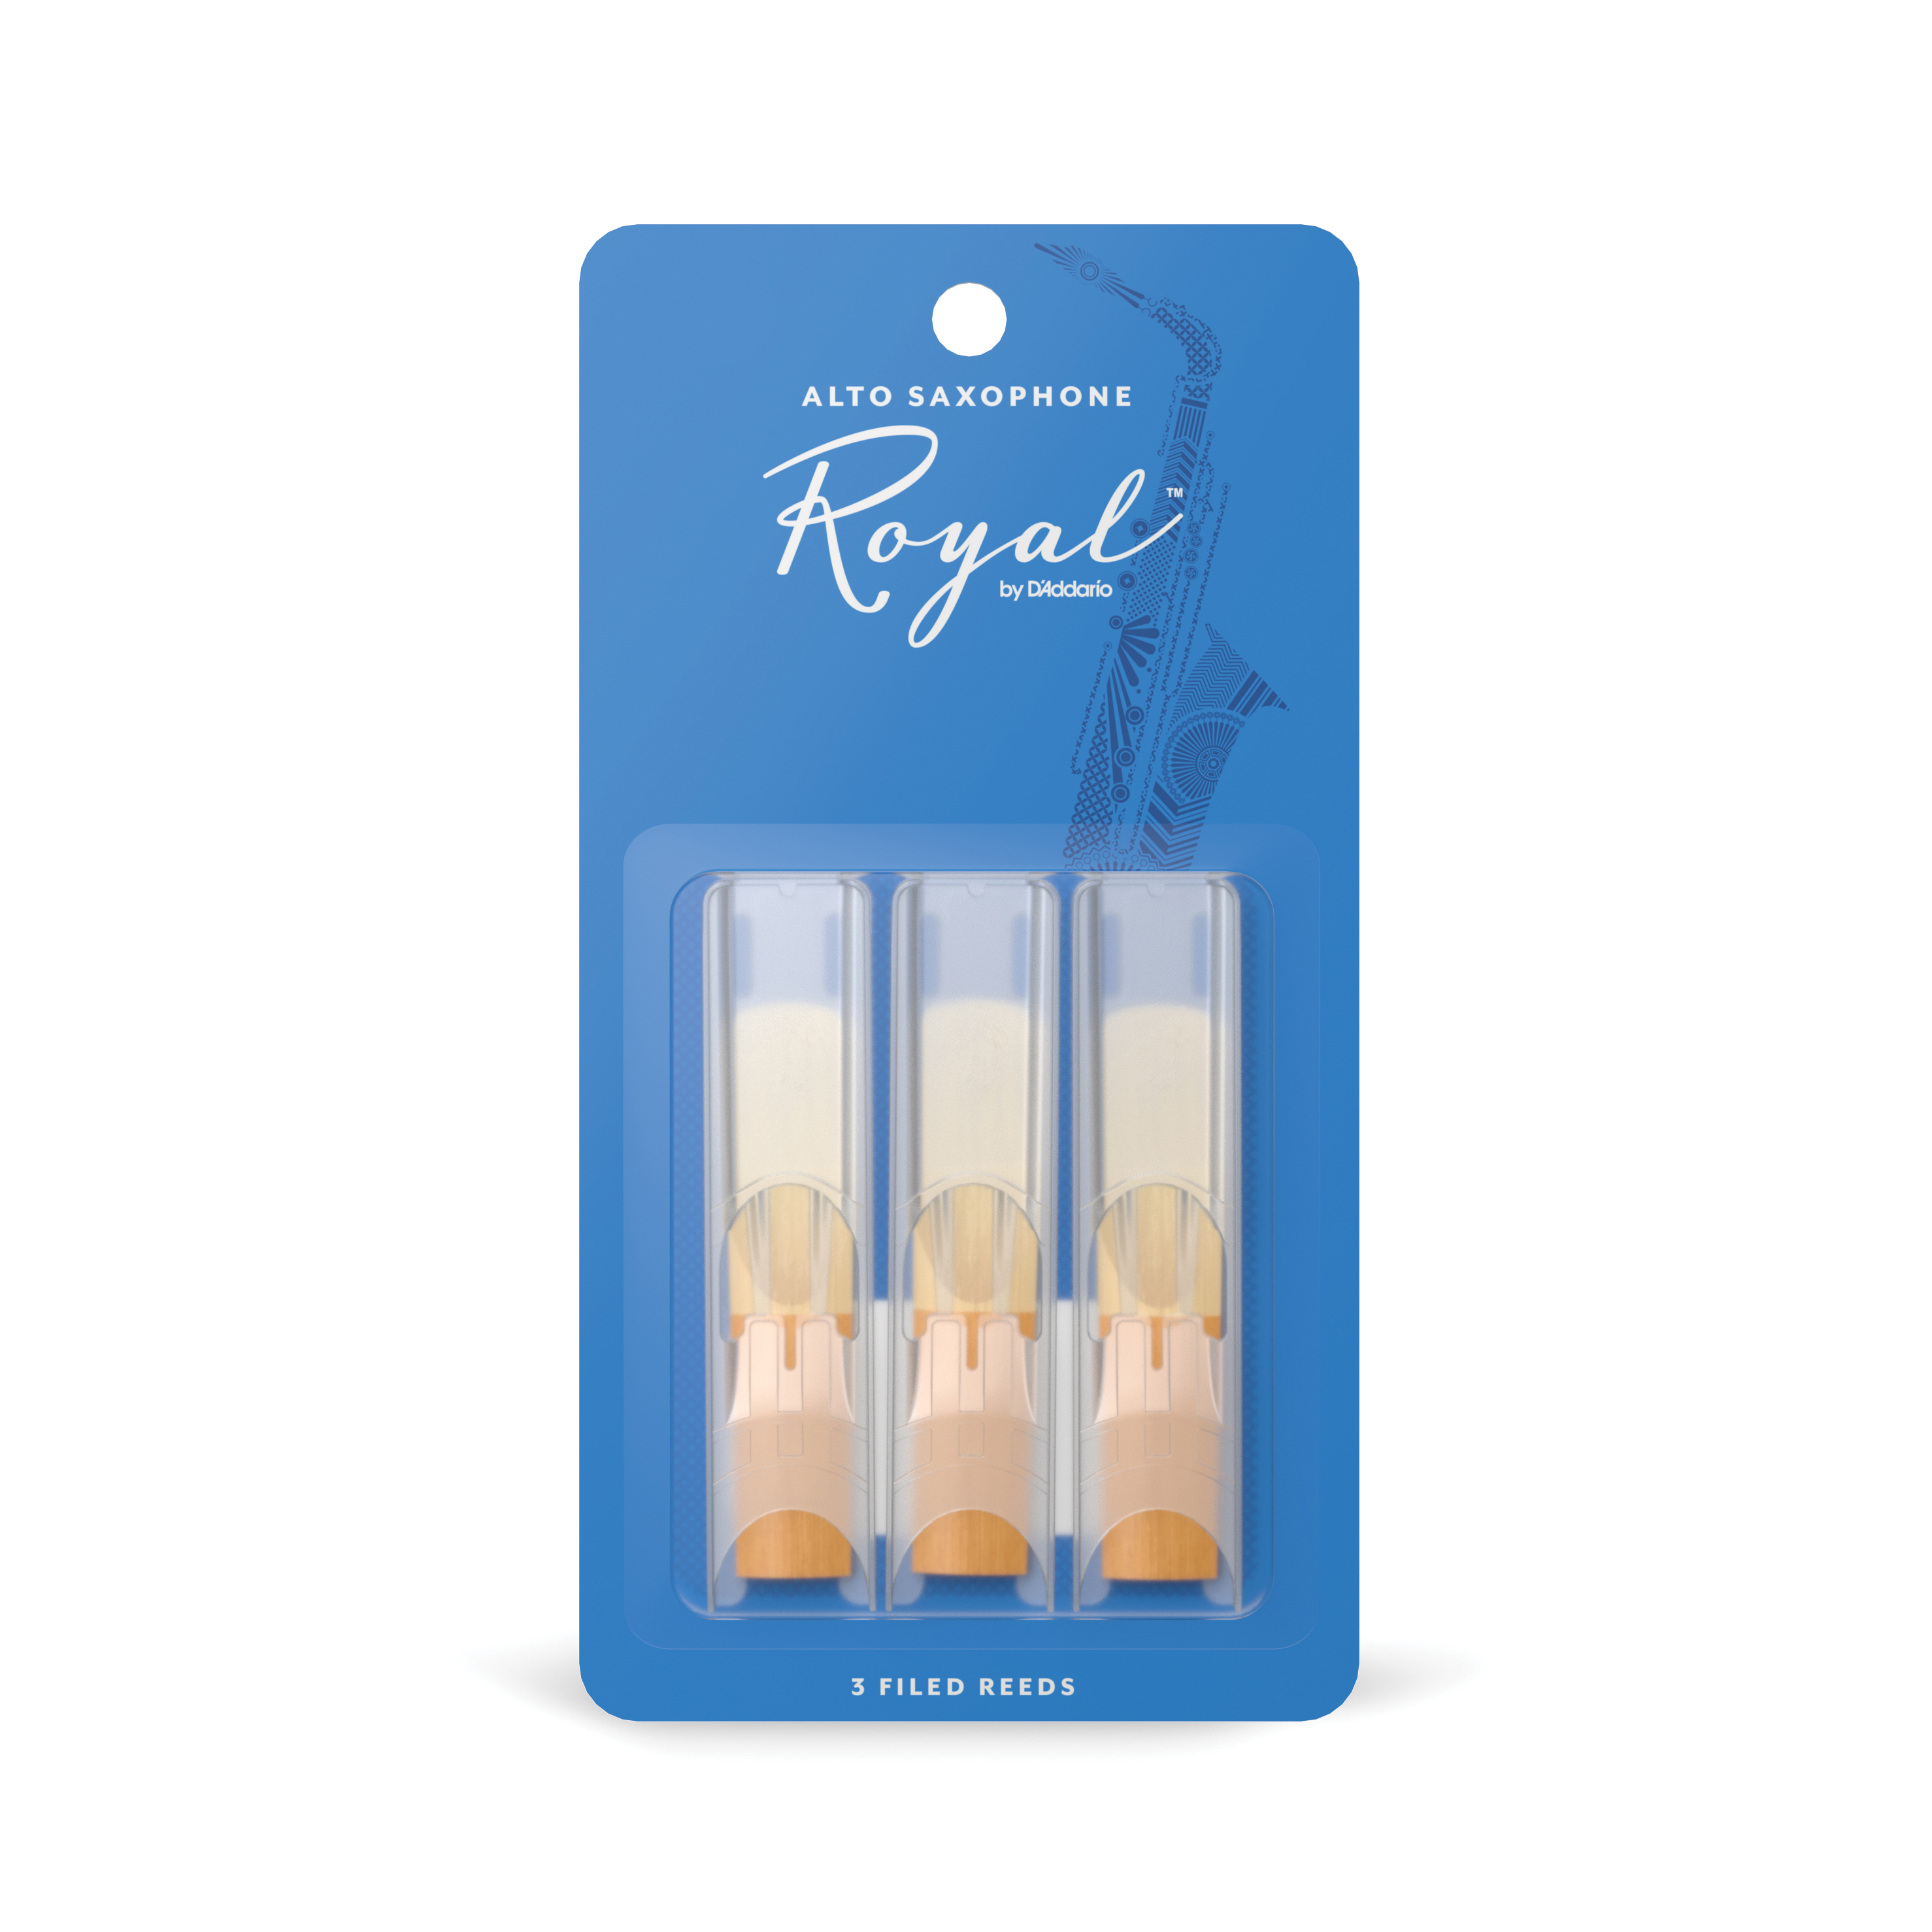 Blue card of three Royal by D'addario Alto Sax Reeds strength two